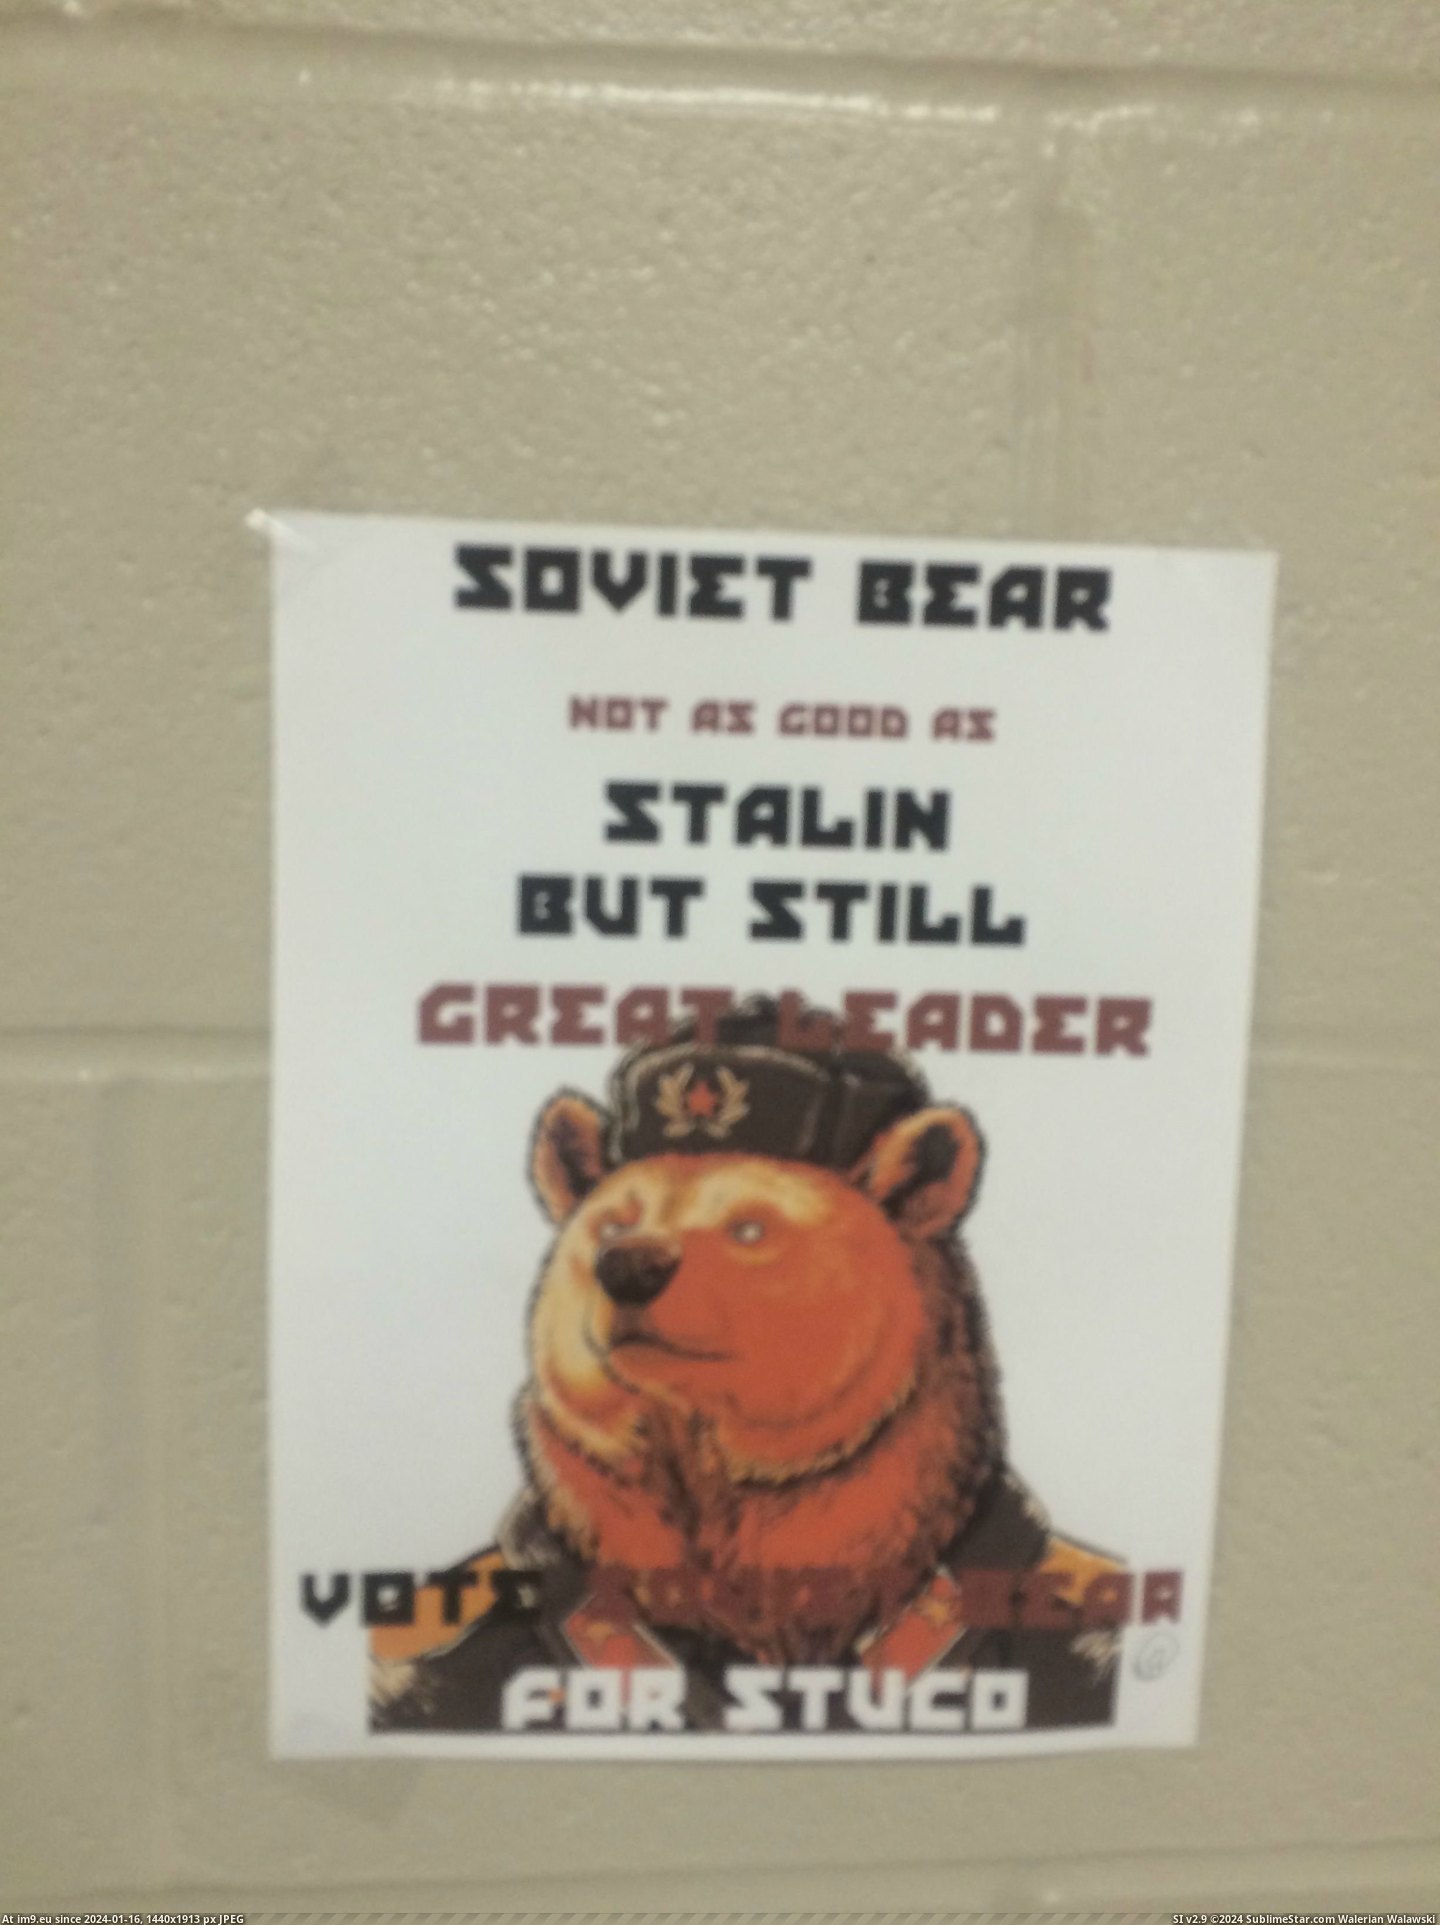 #Funny #School #Decided #Holding #Soviet #Council #Elections #Bear #Student #Run [Funny] So my school is holding elections for student council... and someone has decided to run as Soviet Bear 13 Pic. (Obraz z album My r/FUNNY favs))